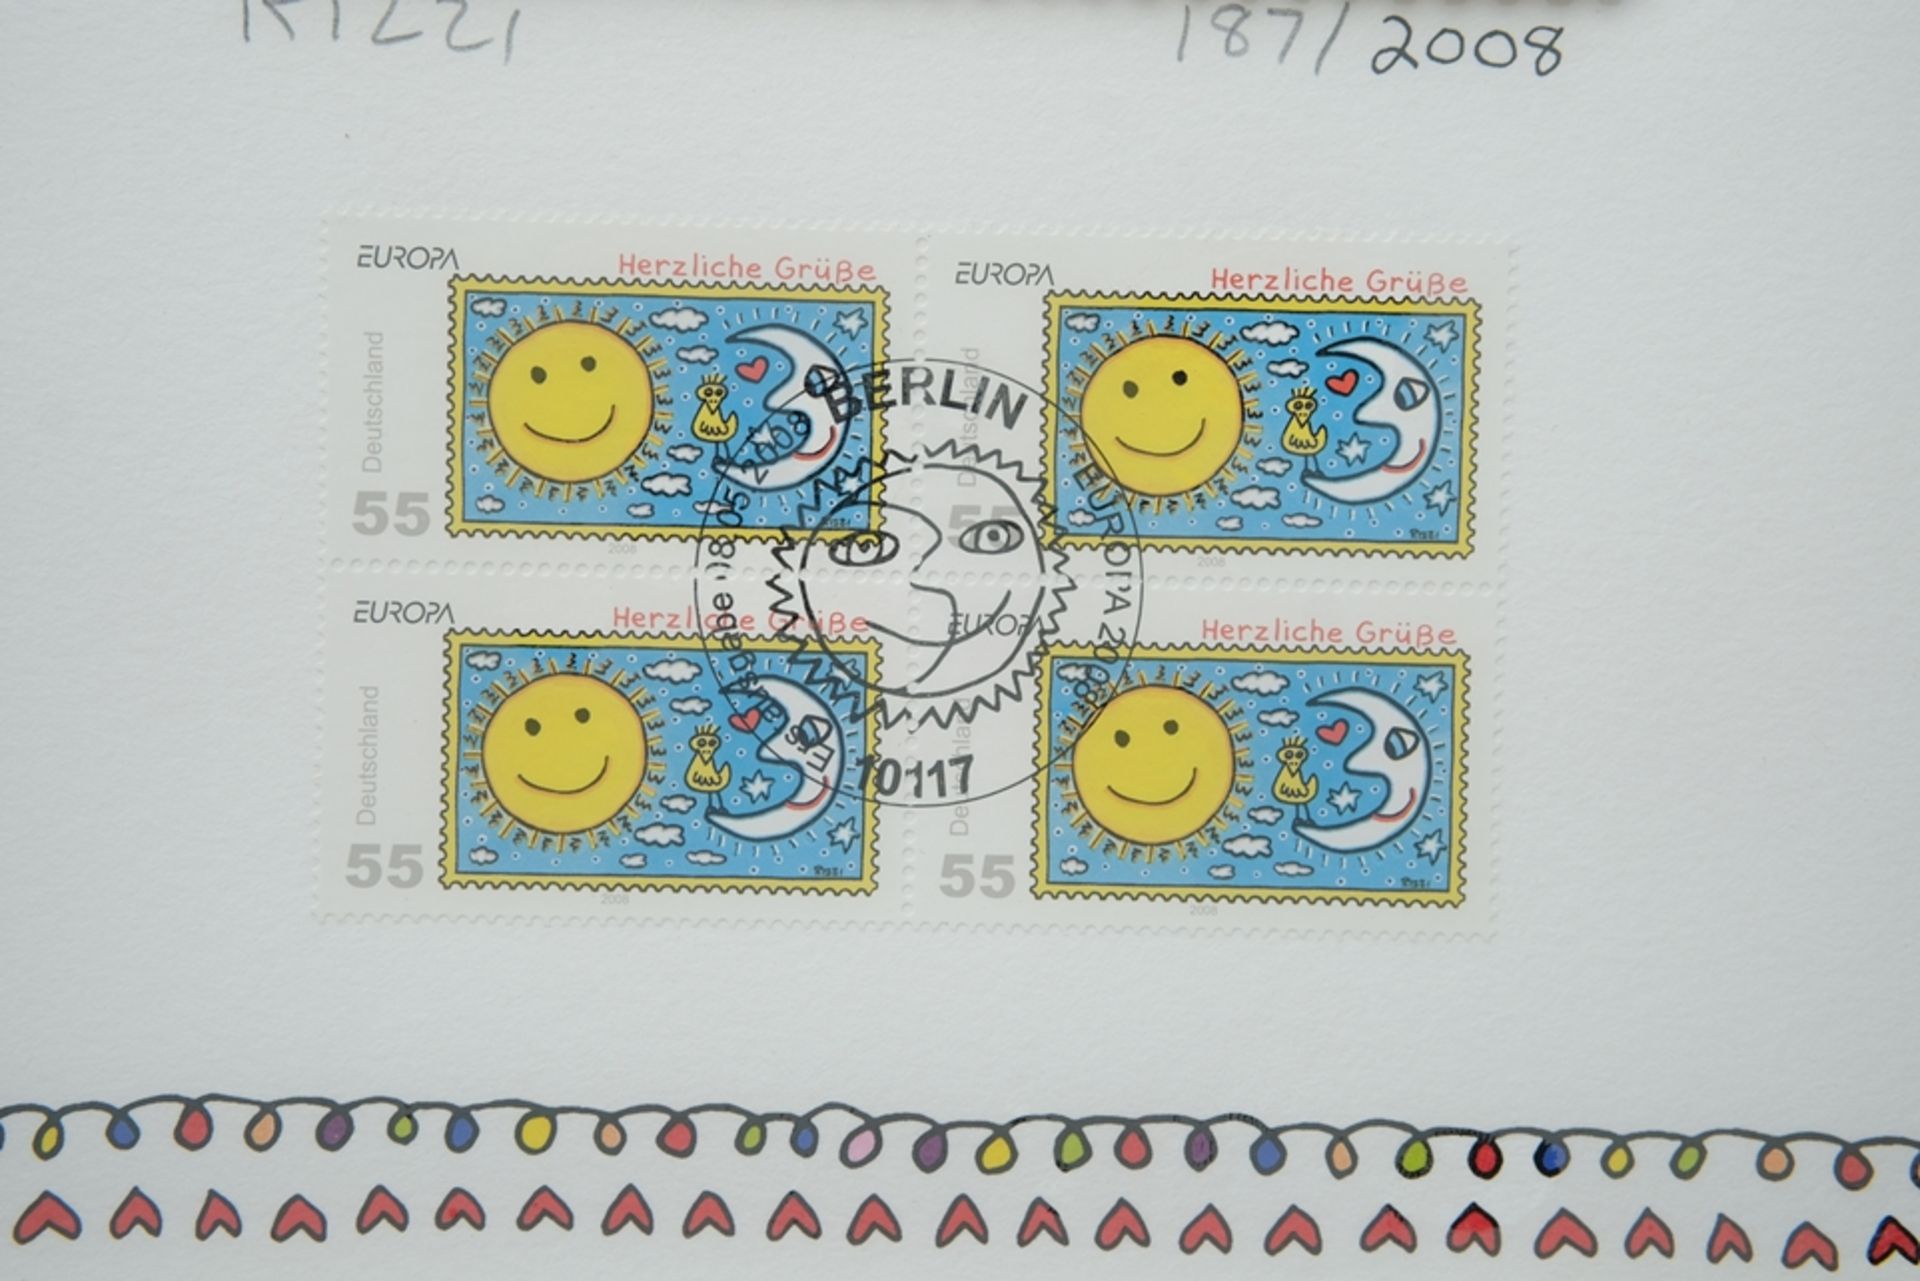 Rizzi, James (1950-2011) "Warm greetings - sun and moon", special edition stamps 2008. 3D graphic,  - Image 3 of 5